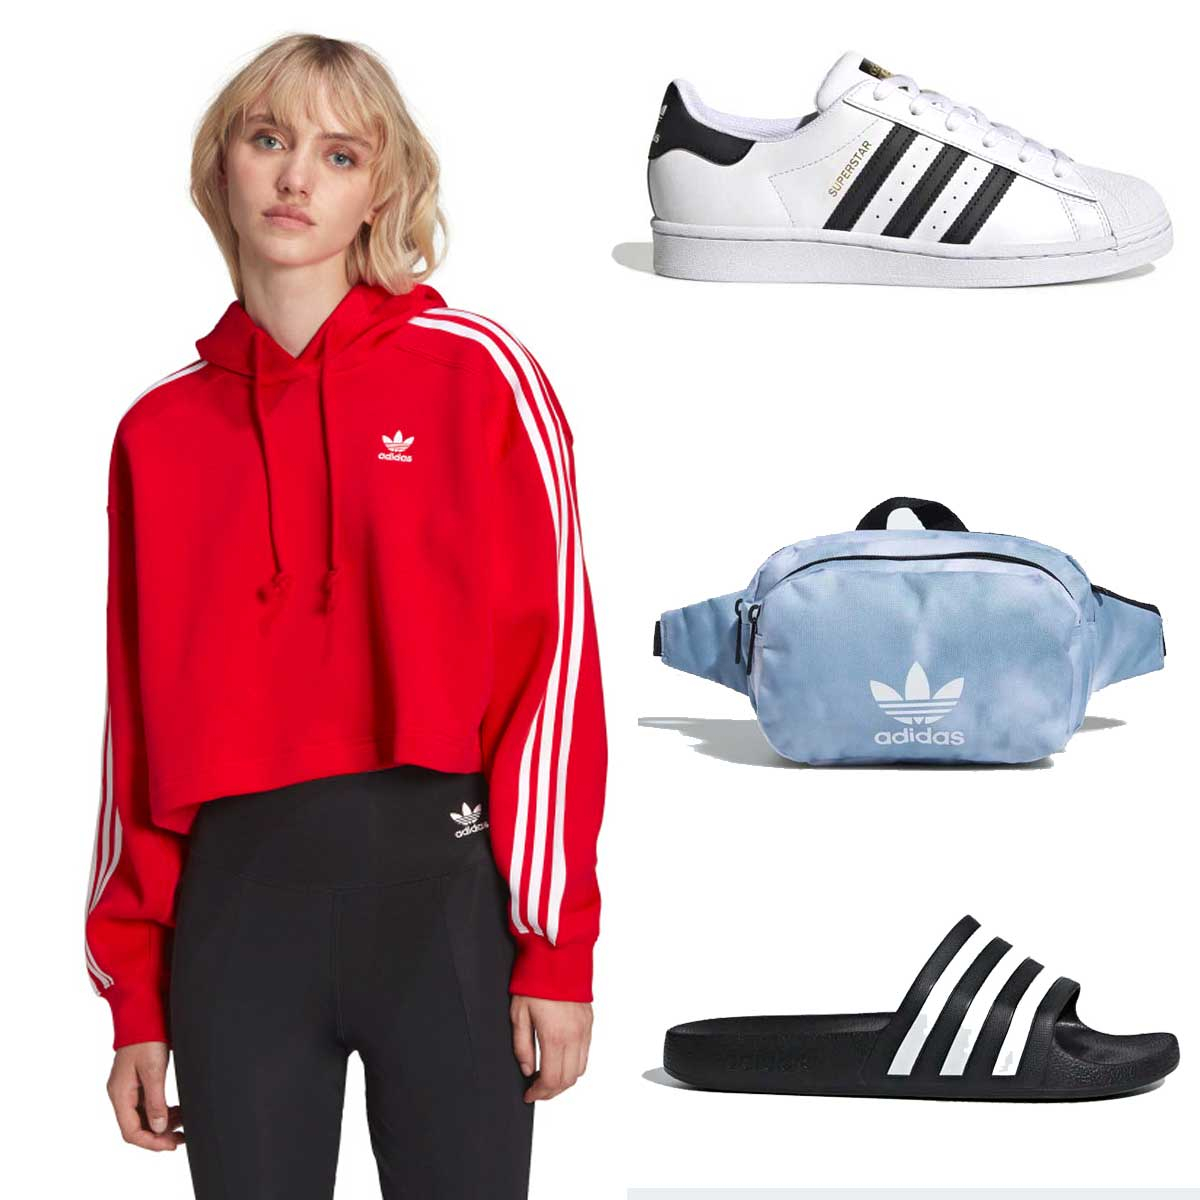 Adidas End of Season Deals: Up to 60% Off Clothes, Shoes & More - E! Online